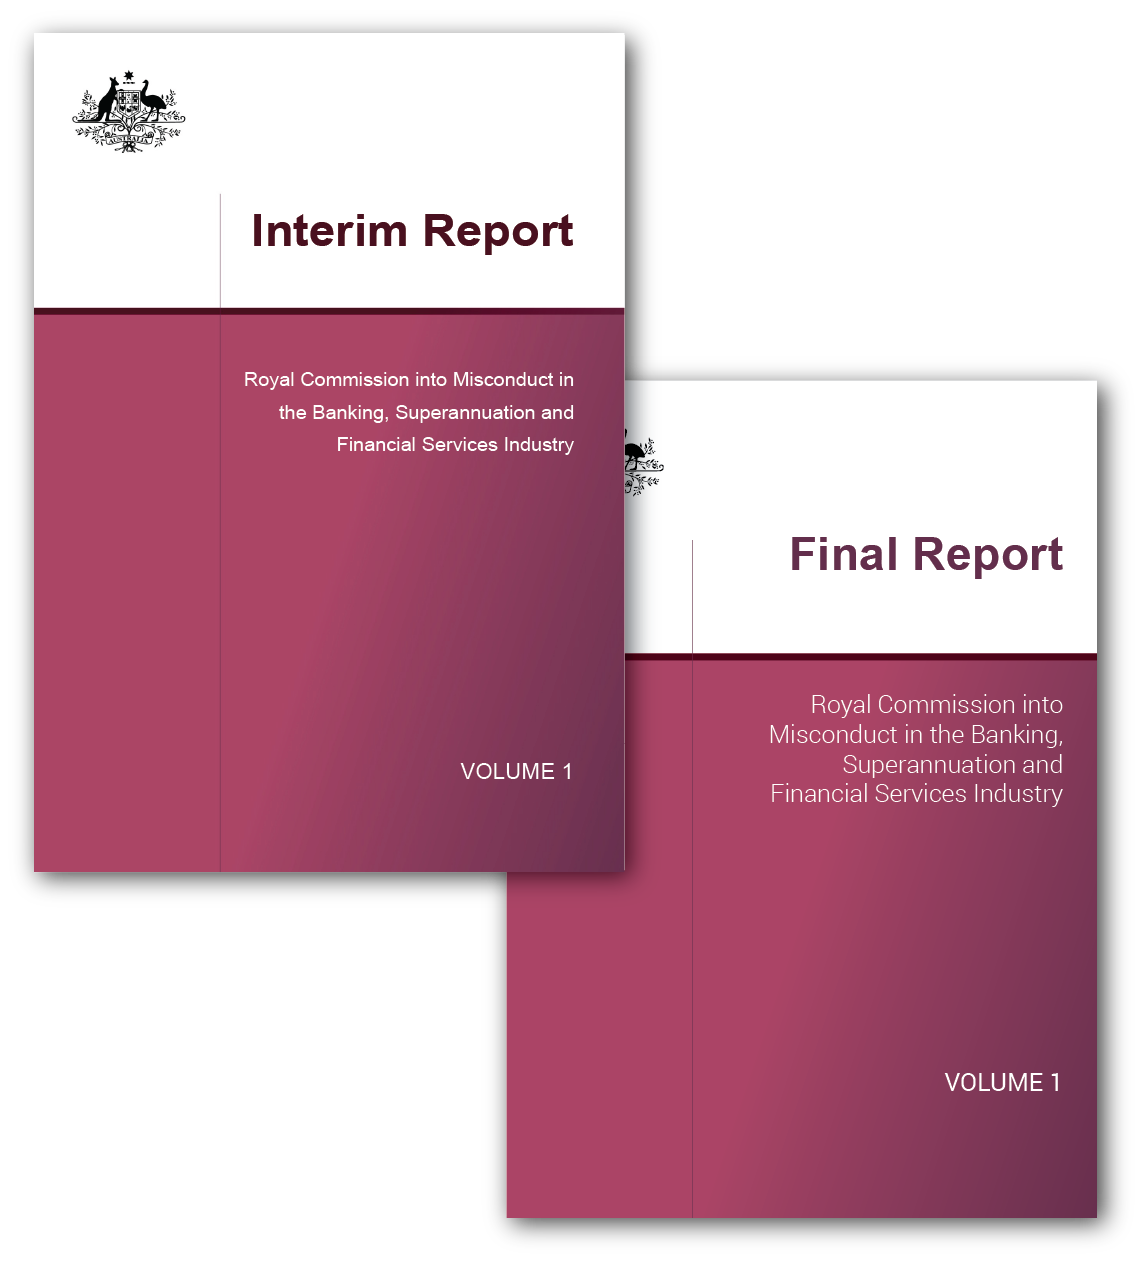 Interim Report and the Final Report